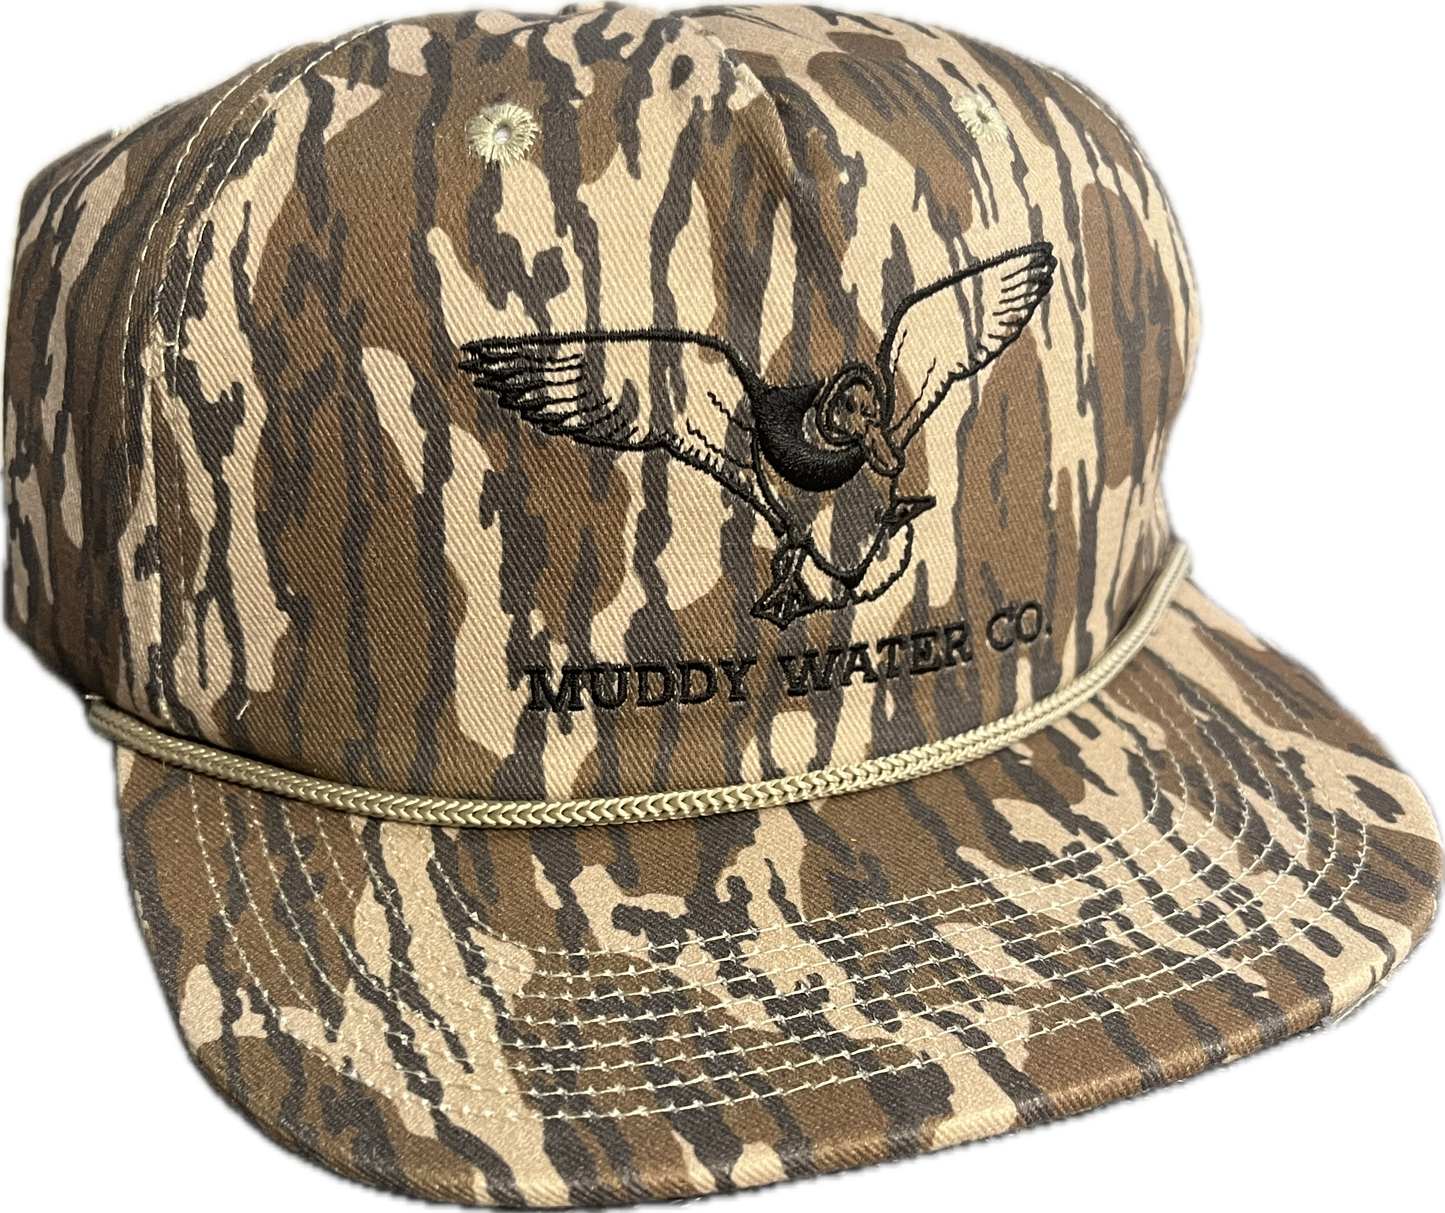 Muddy Water Hat with Solid Back, Flat Bill, Timber Camo with Rope